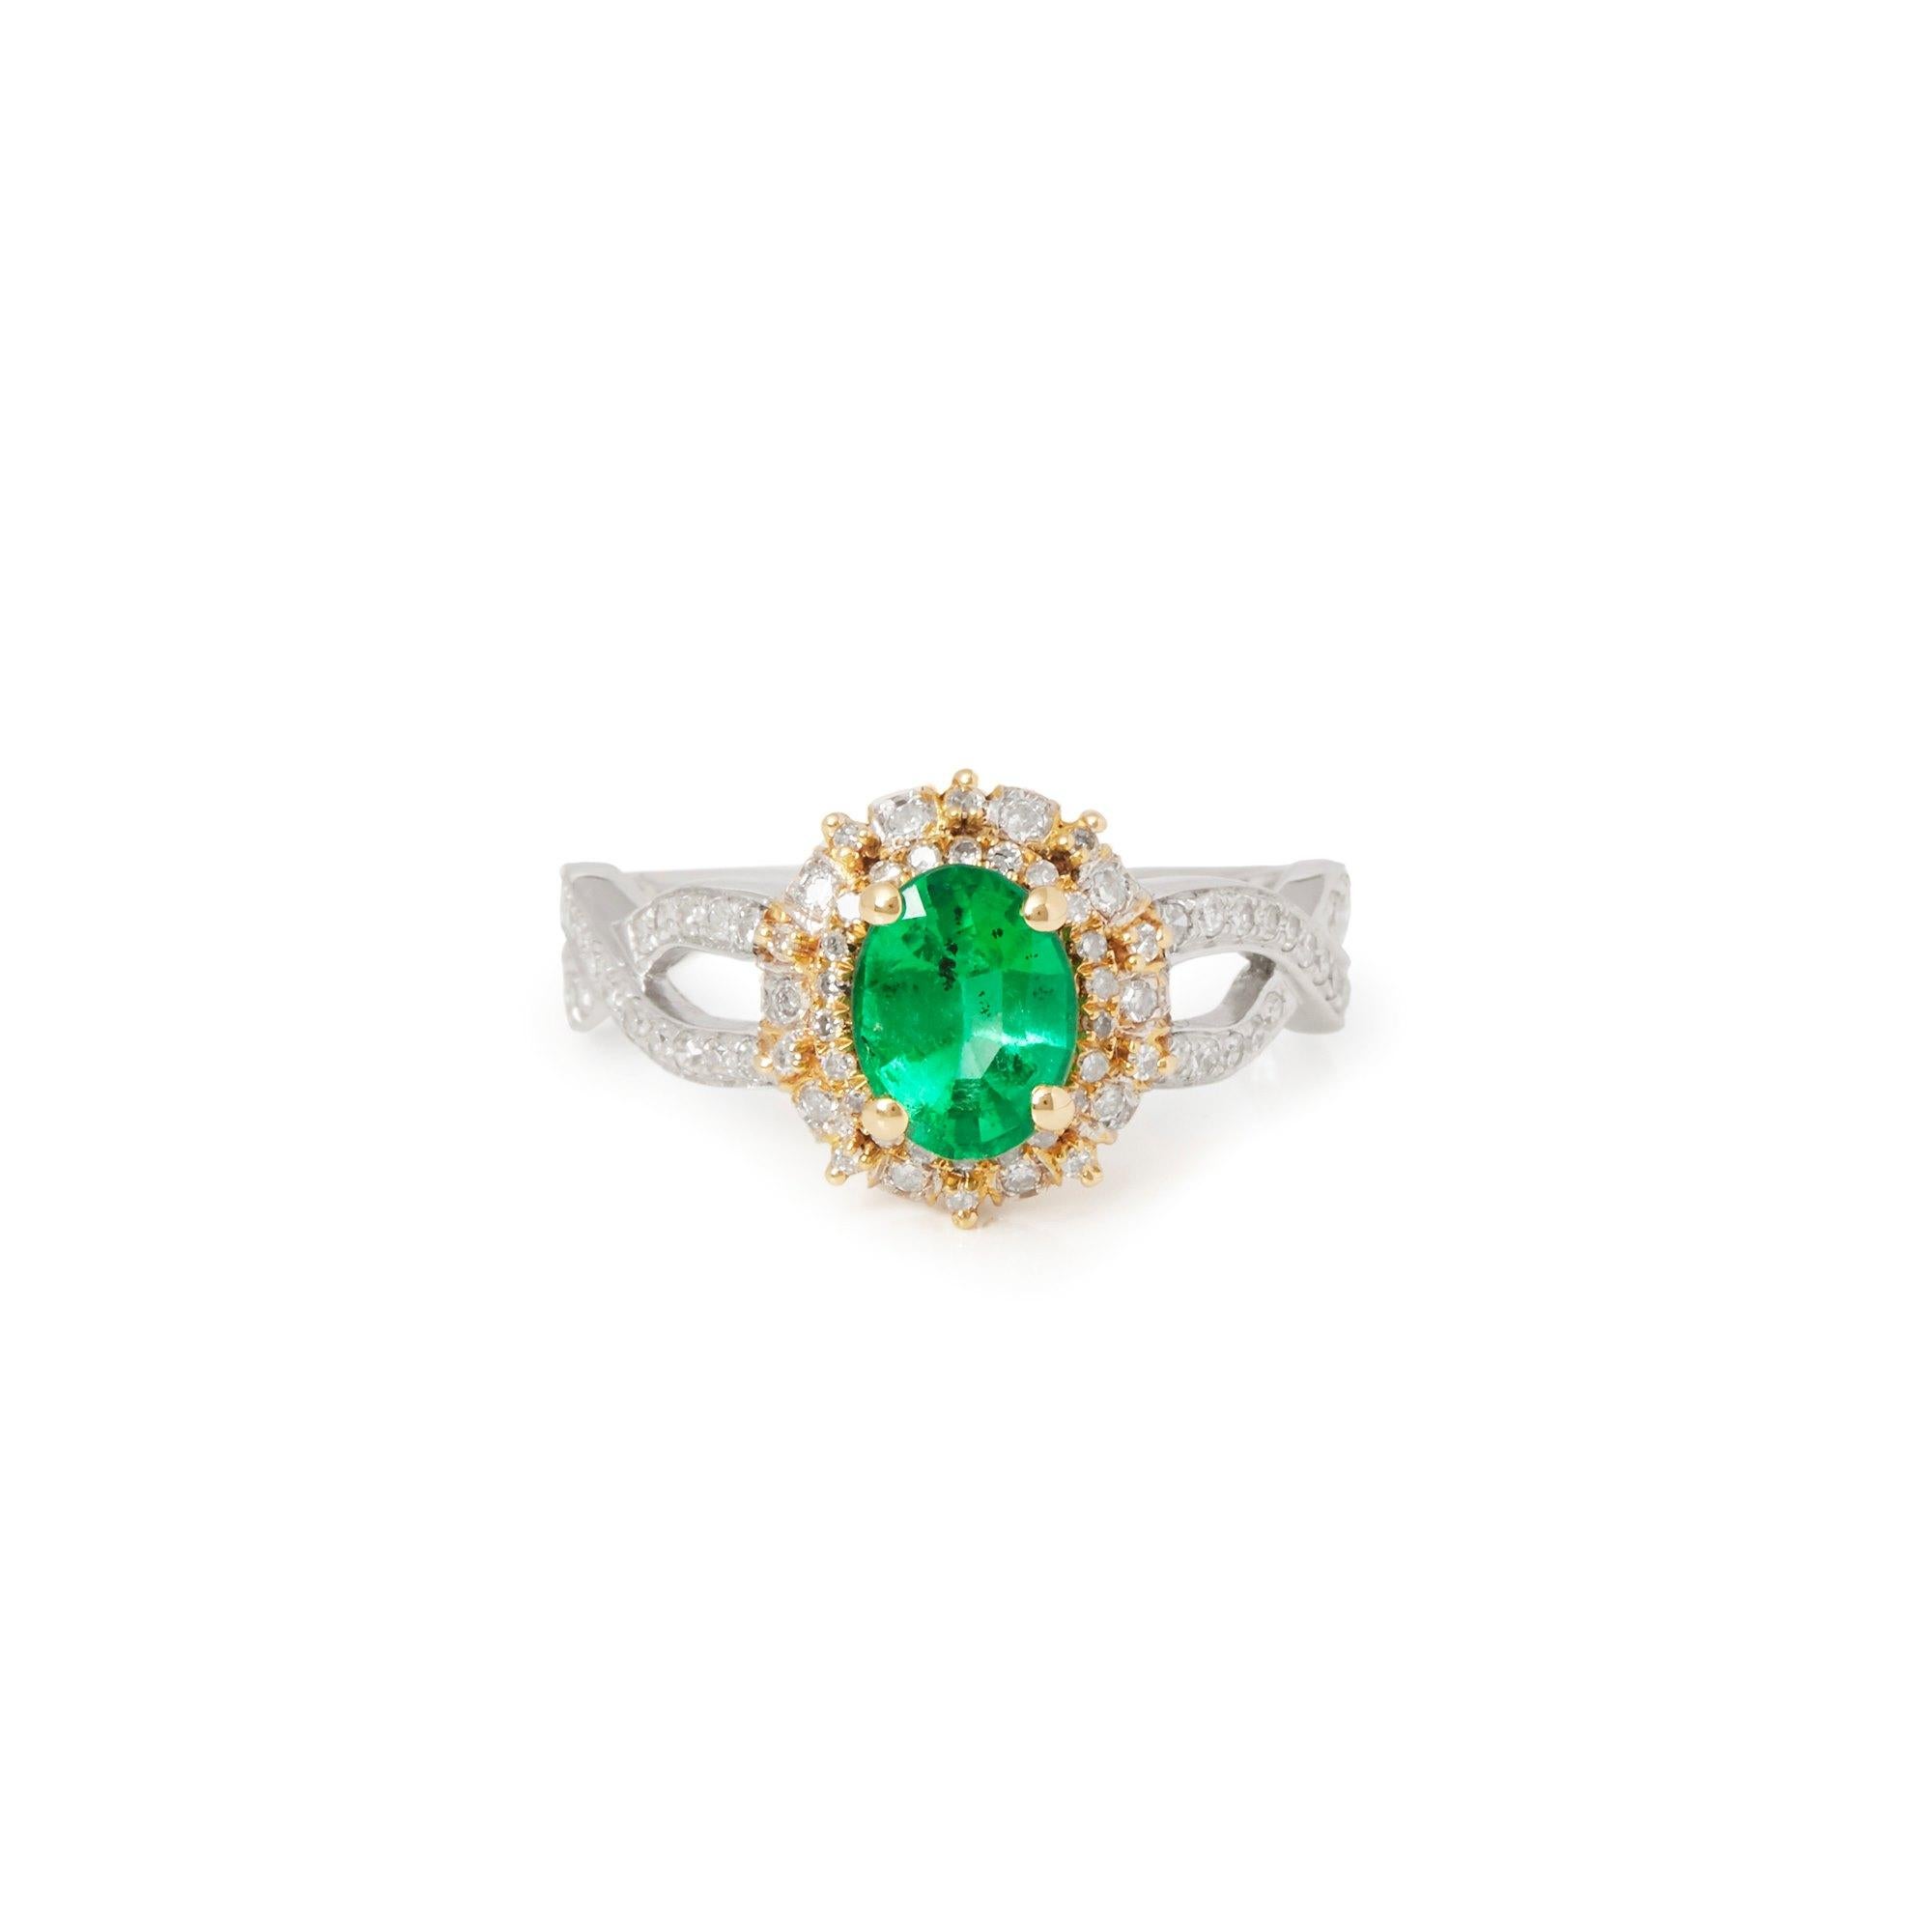 This ring designed by David Jerome is from his private collection and features one oval cut Emerald totalling 1.03cts sourced in Zambia. Set with round brilliant cut Diamonds totalling 0.52cts mounted in an 18k white gold setting. Finger size UK M,